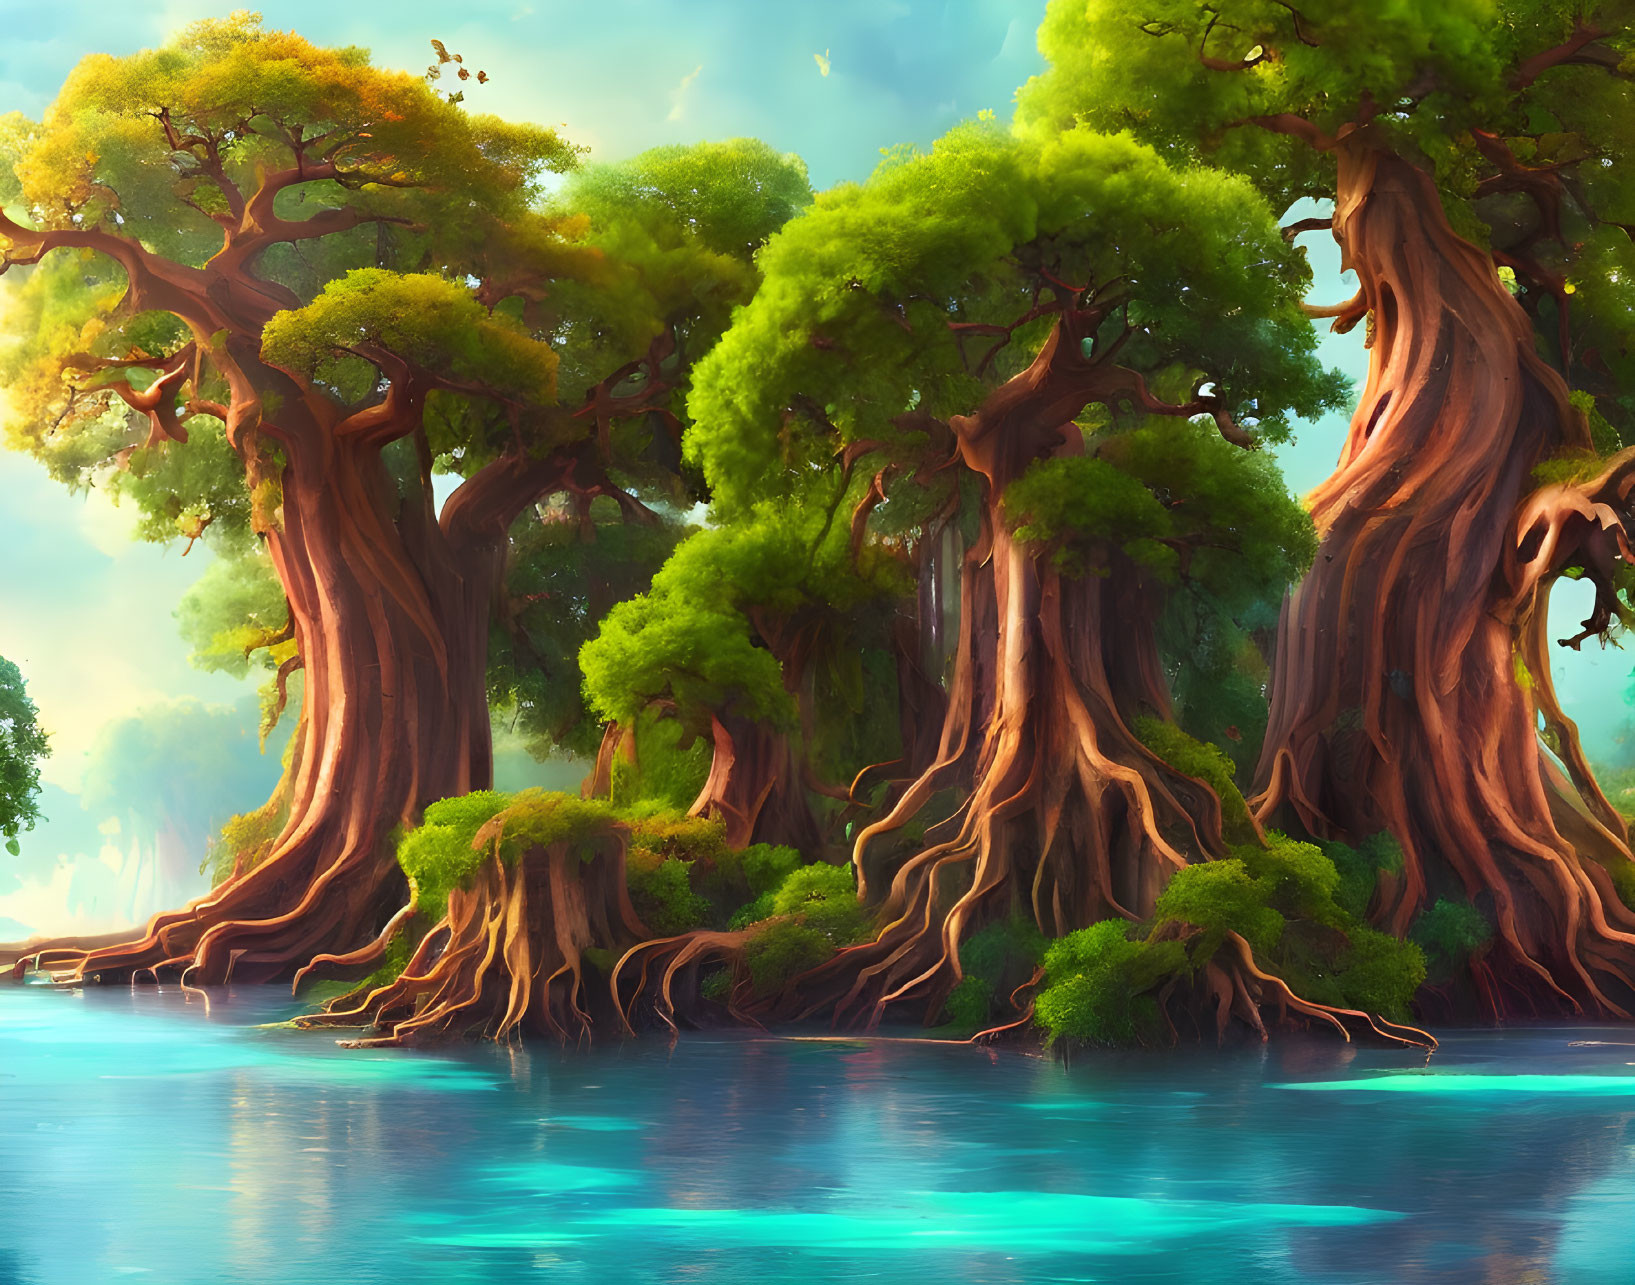 Ancient towering trees with intricate roots by a serene turquoise river